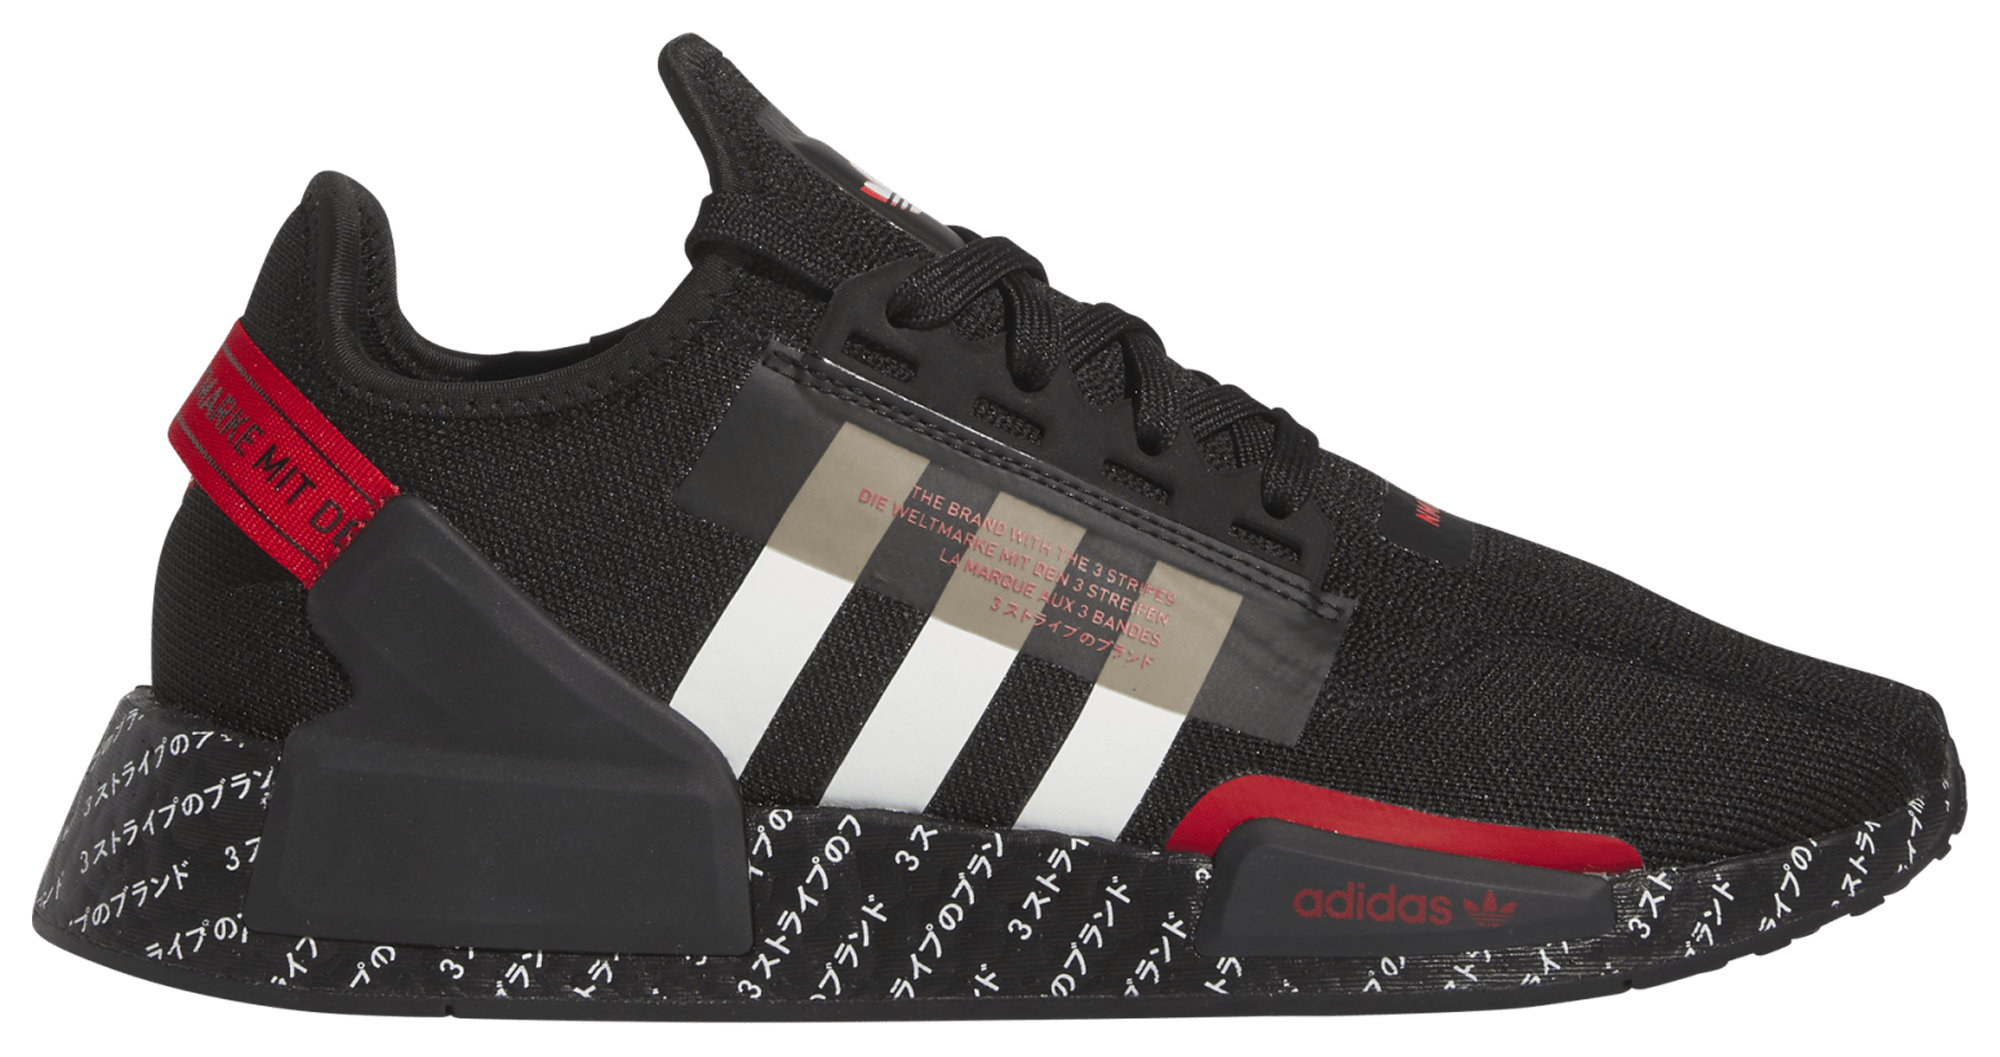 Buy Adidas NMD_R1 V2 from £64.99 (Today) – Best Deals on